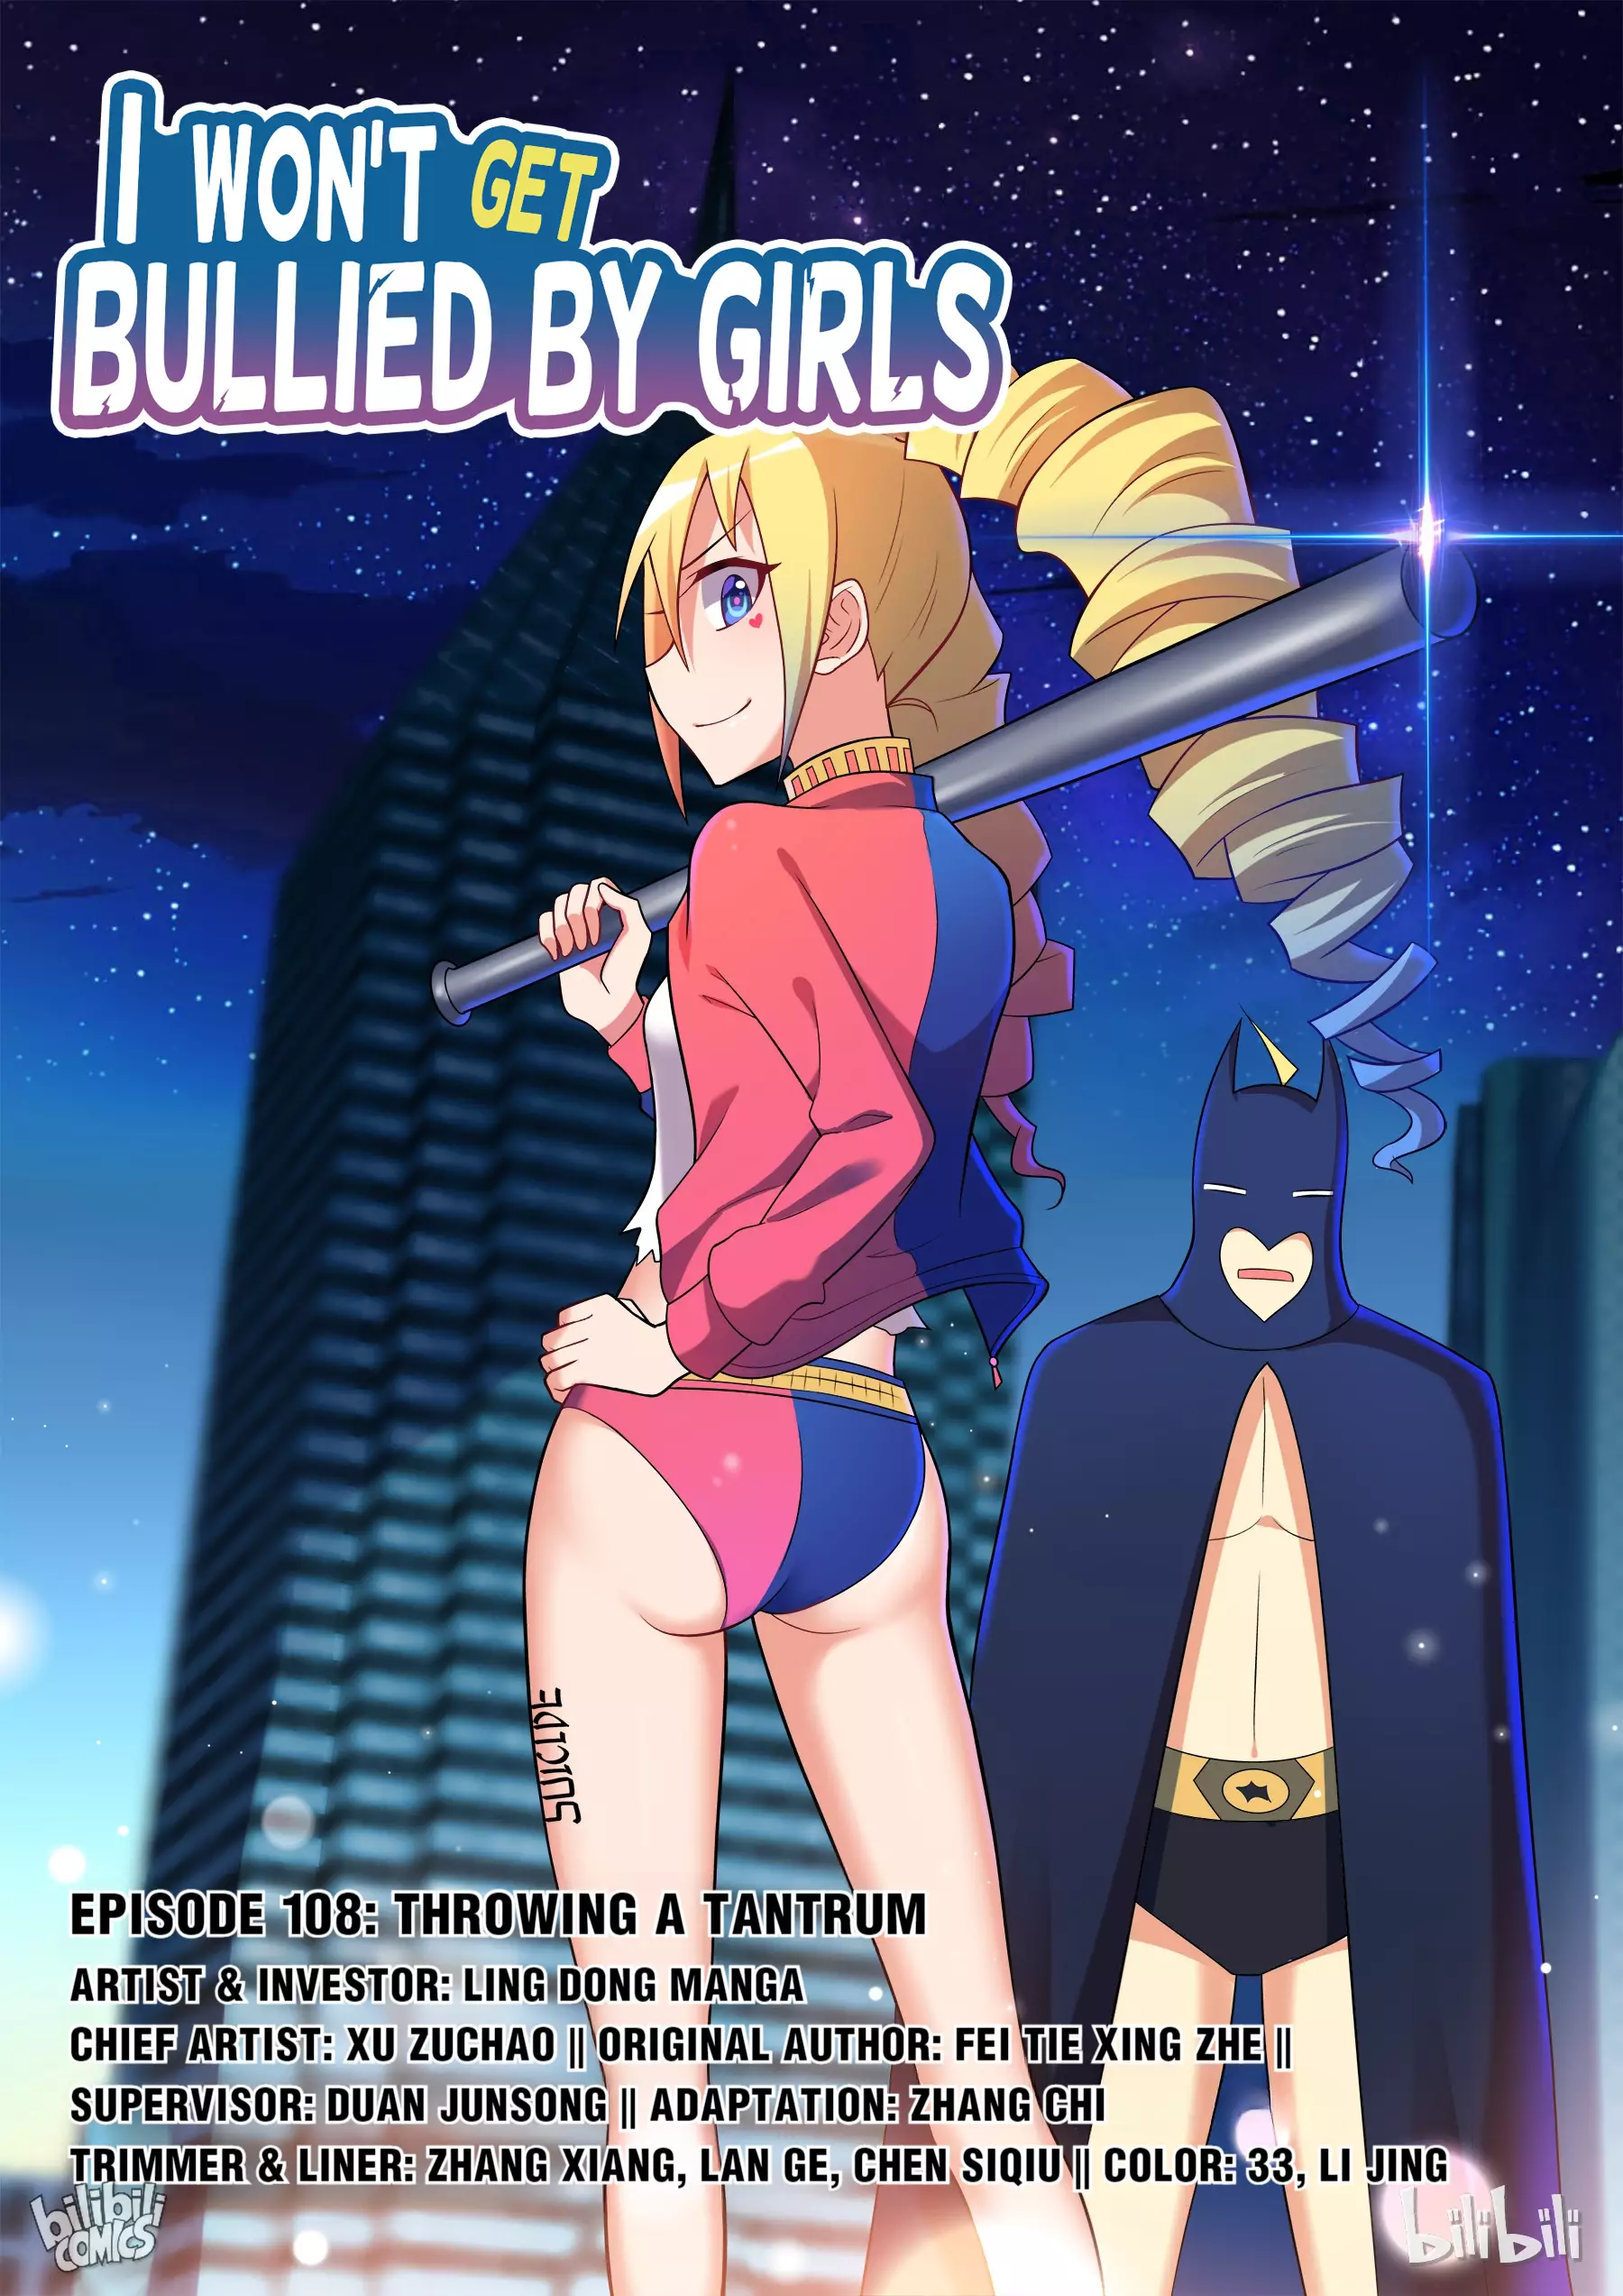 I Don't Want To Be Bullied By Girls - 108 page 1-94b48a24